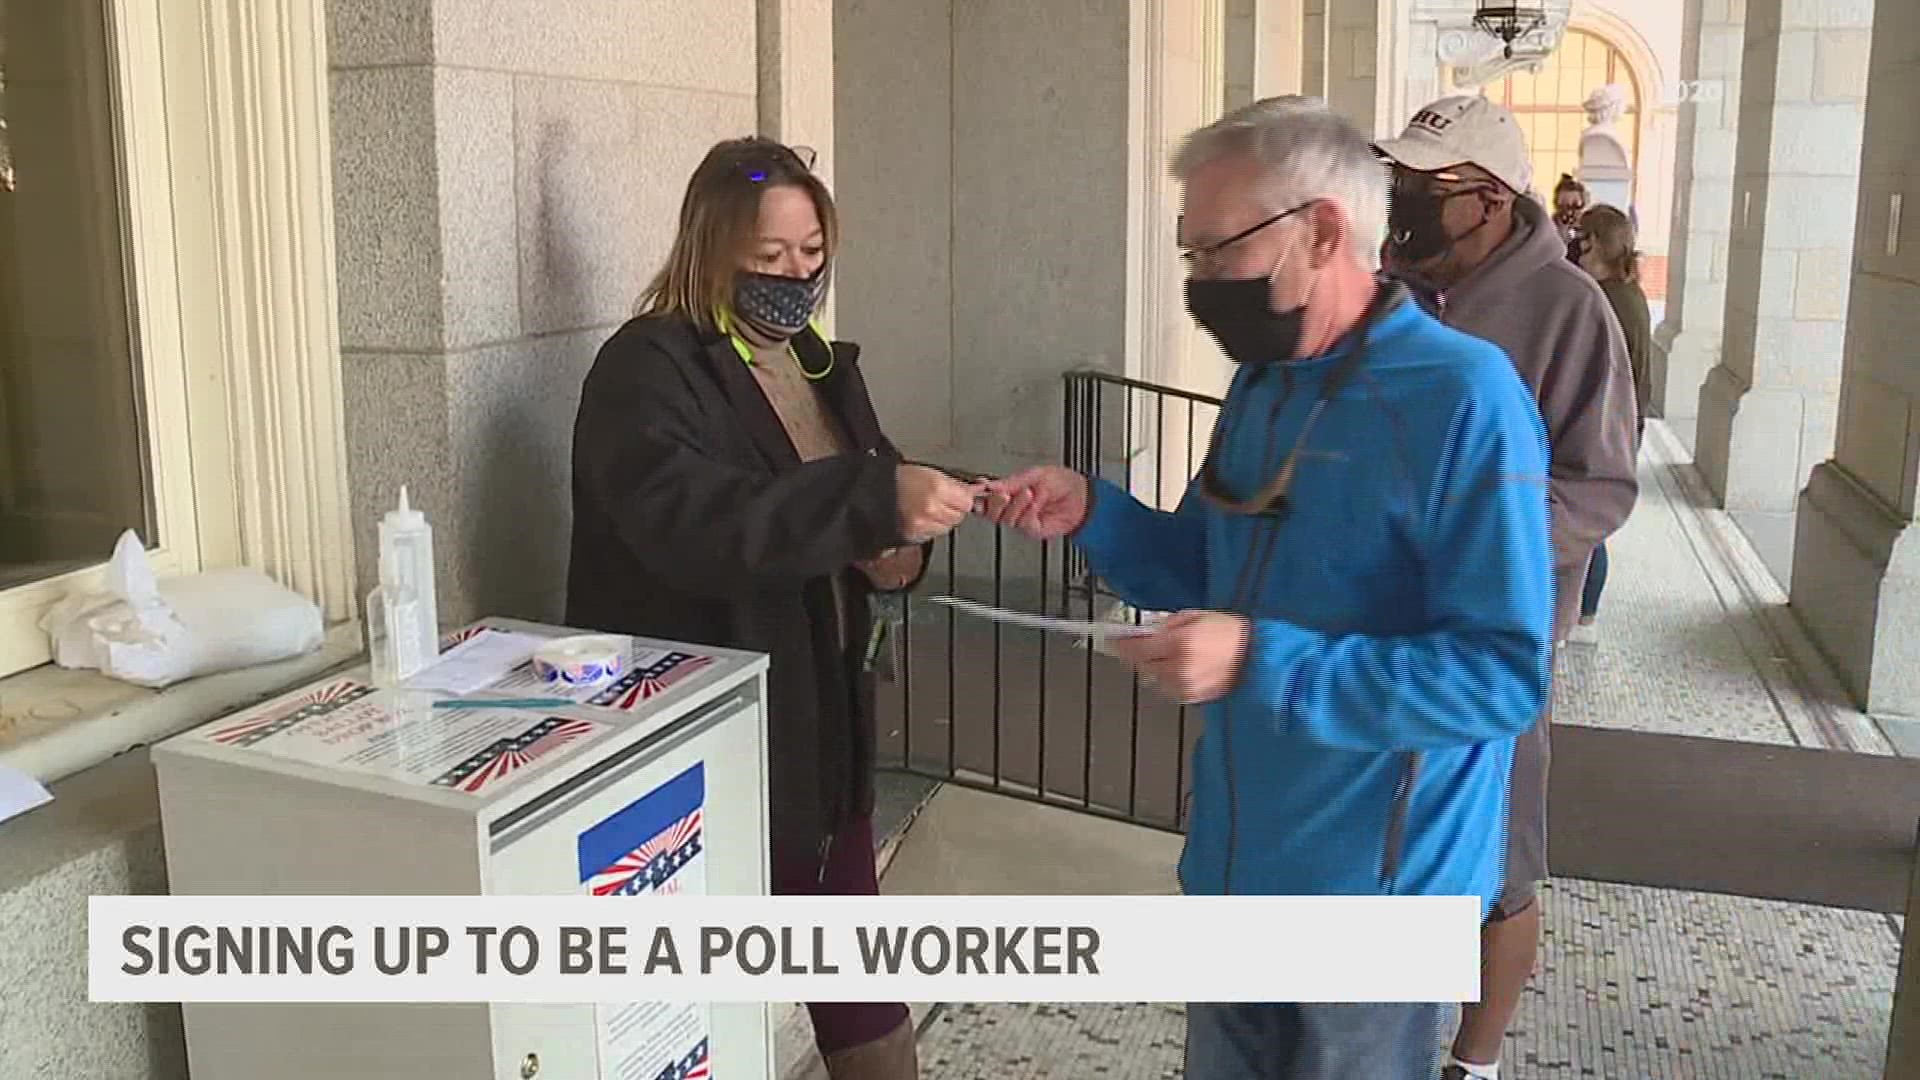 About 3,000 people have signed up statewide to be poll workers, according to the Department of State. Pennsylvania needs about 50,000 poll workers.